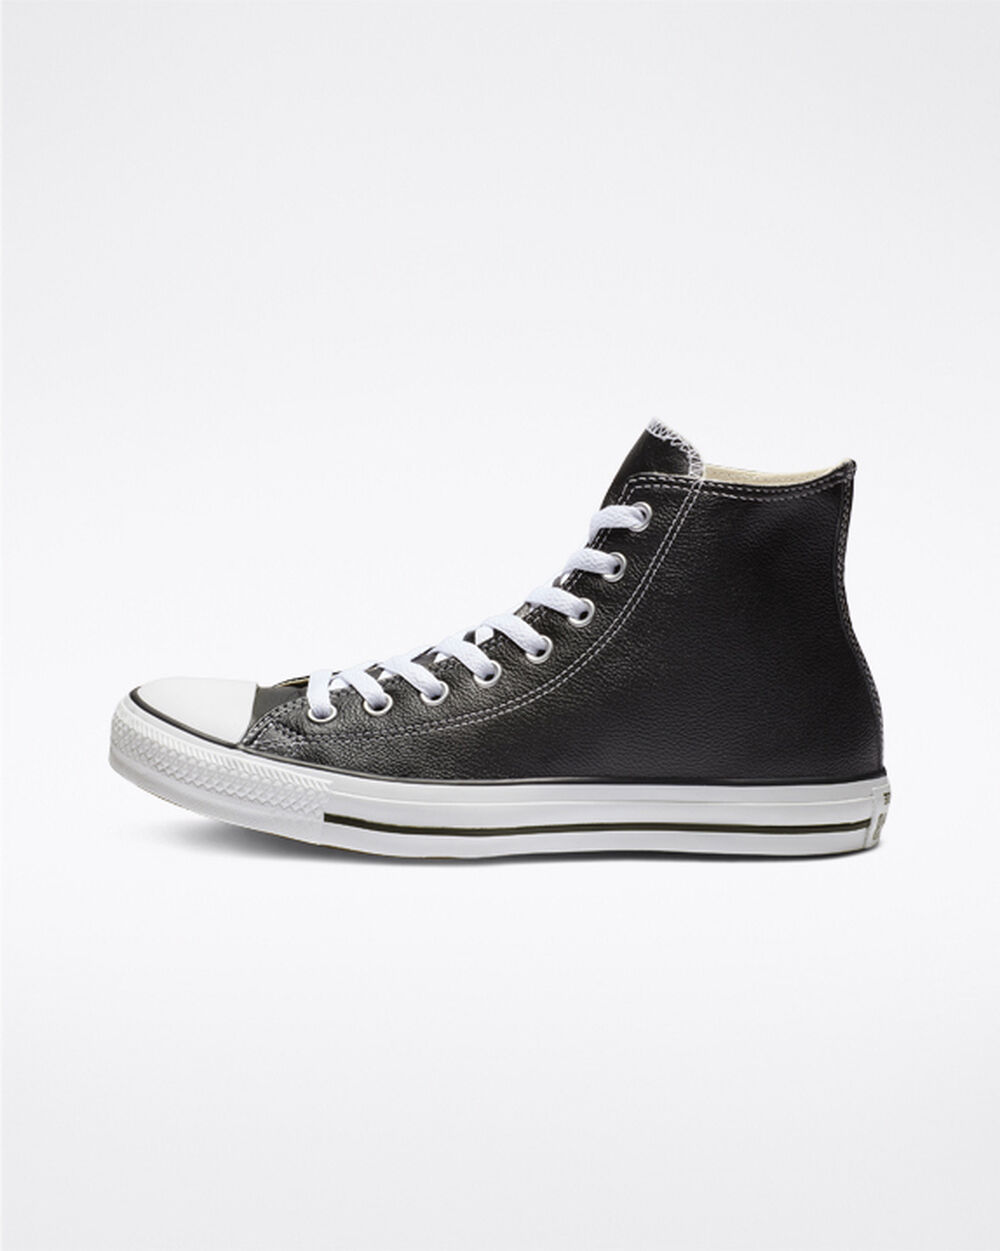 Tenis Converse Chuck Taylor All Star Mujer Negros | Mexico-765136